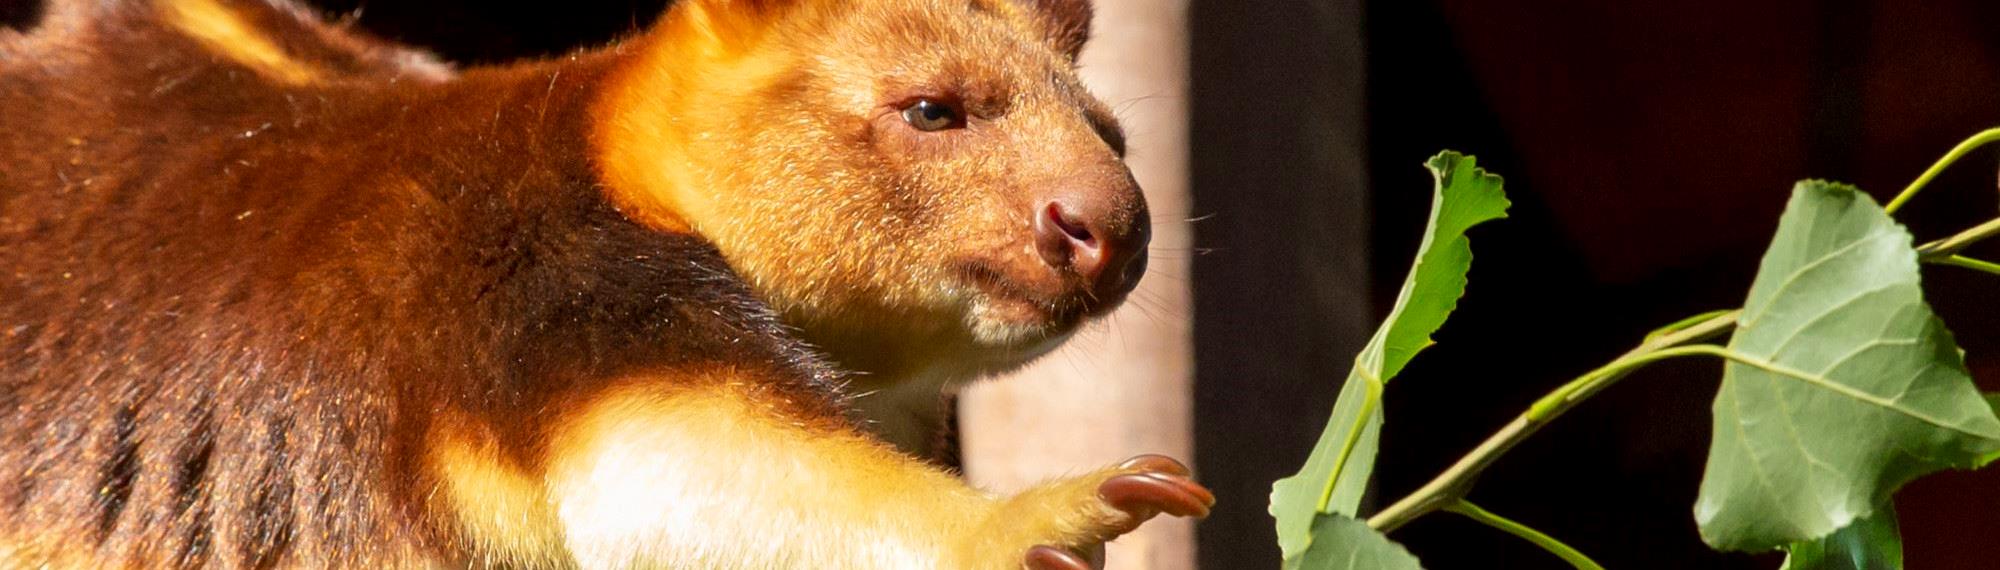 Goodfellow's Tree Kangaroo reaching out to grab a leafy branch.